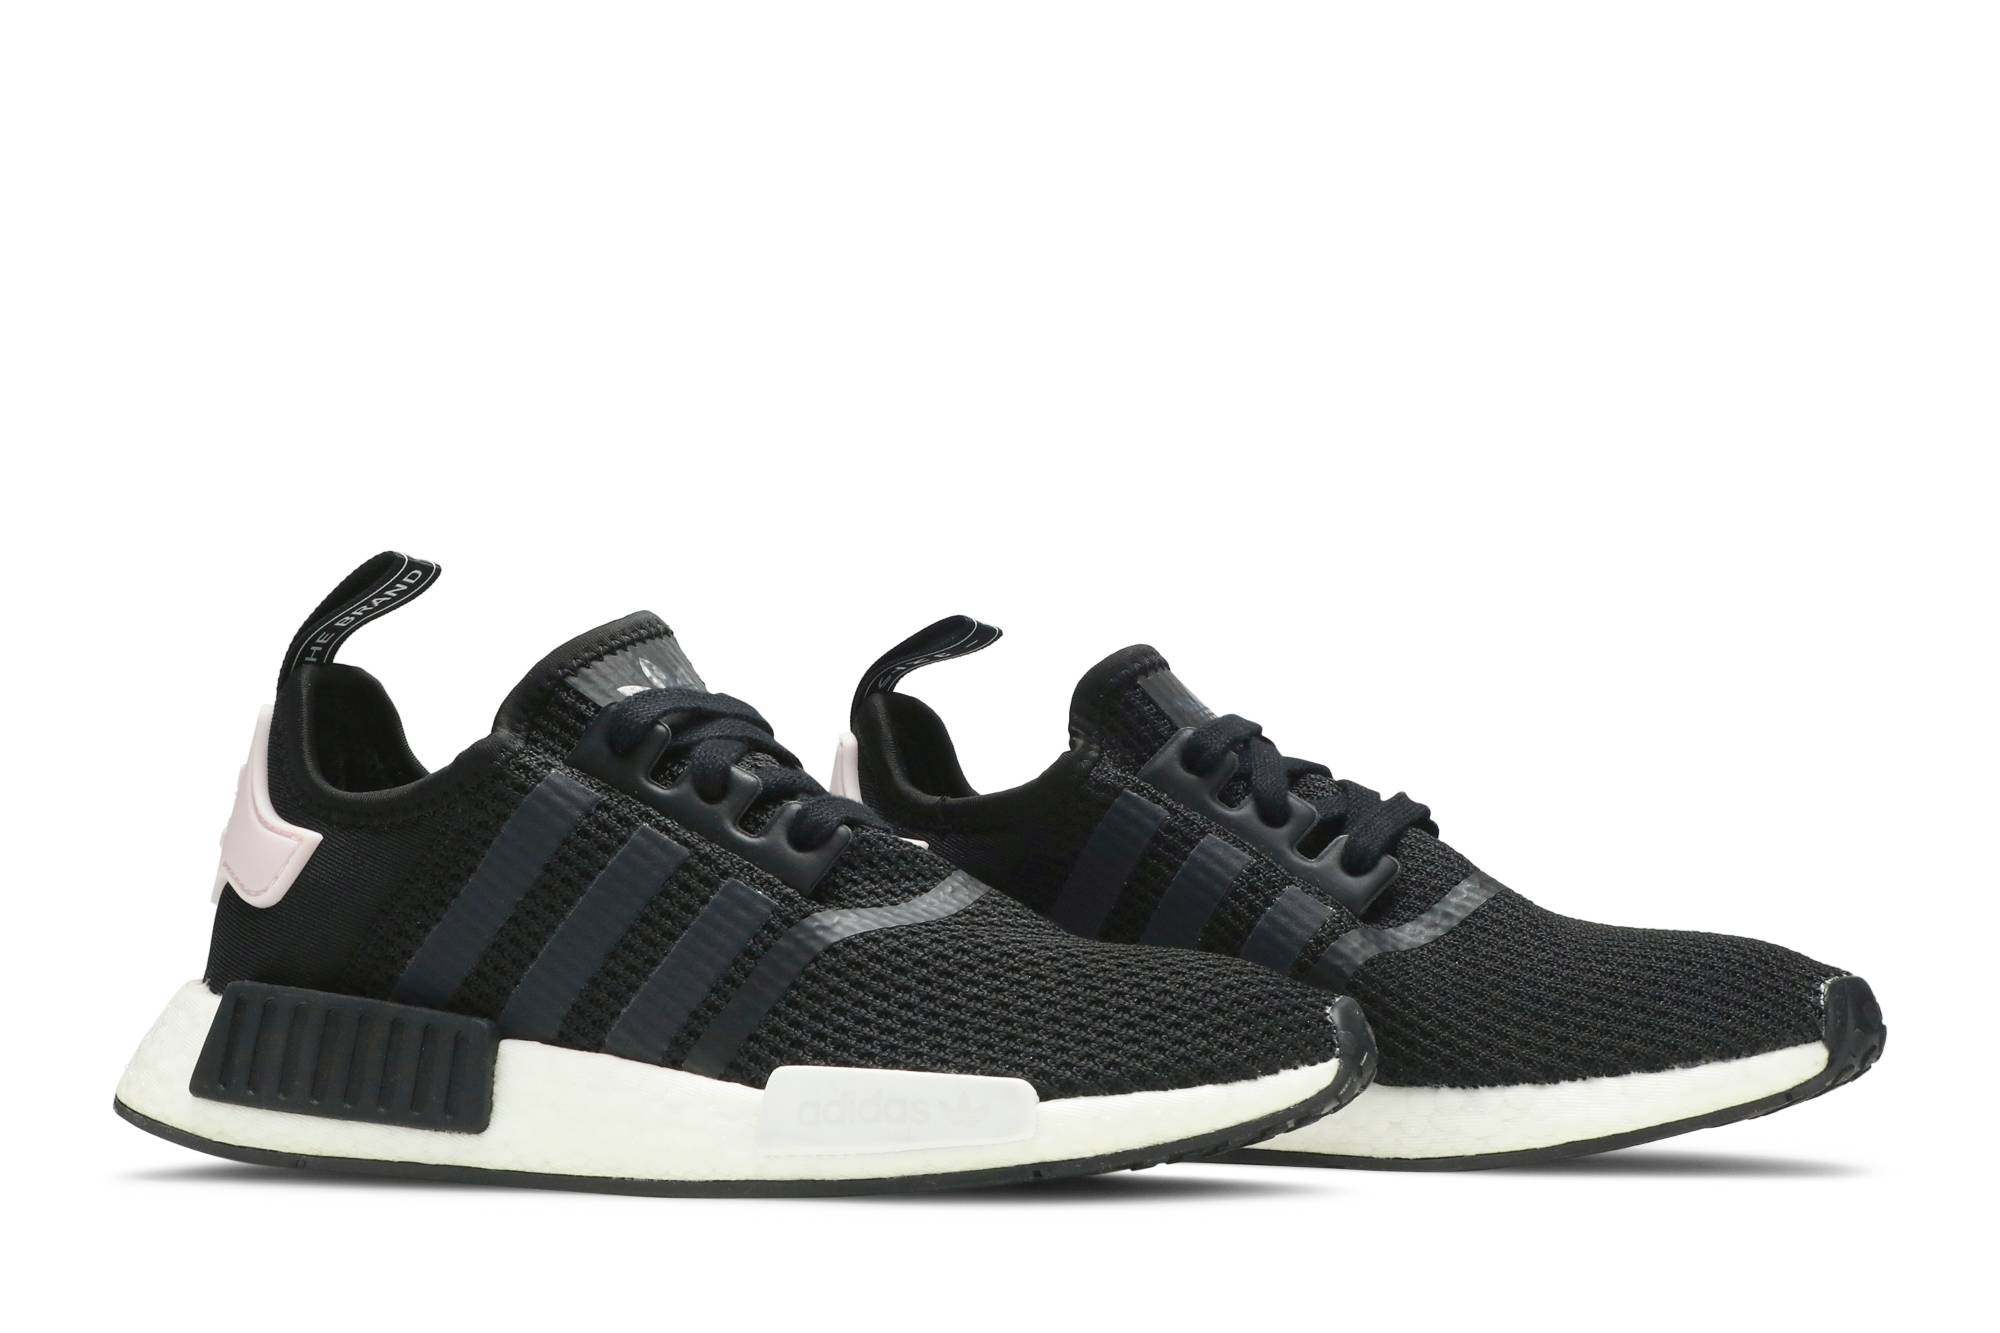 adidas NMD R1 Core Black Clear Pink (Women's)